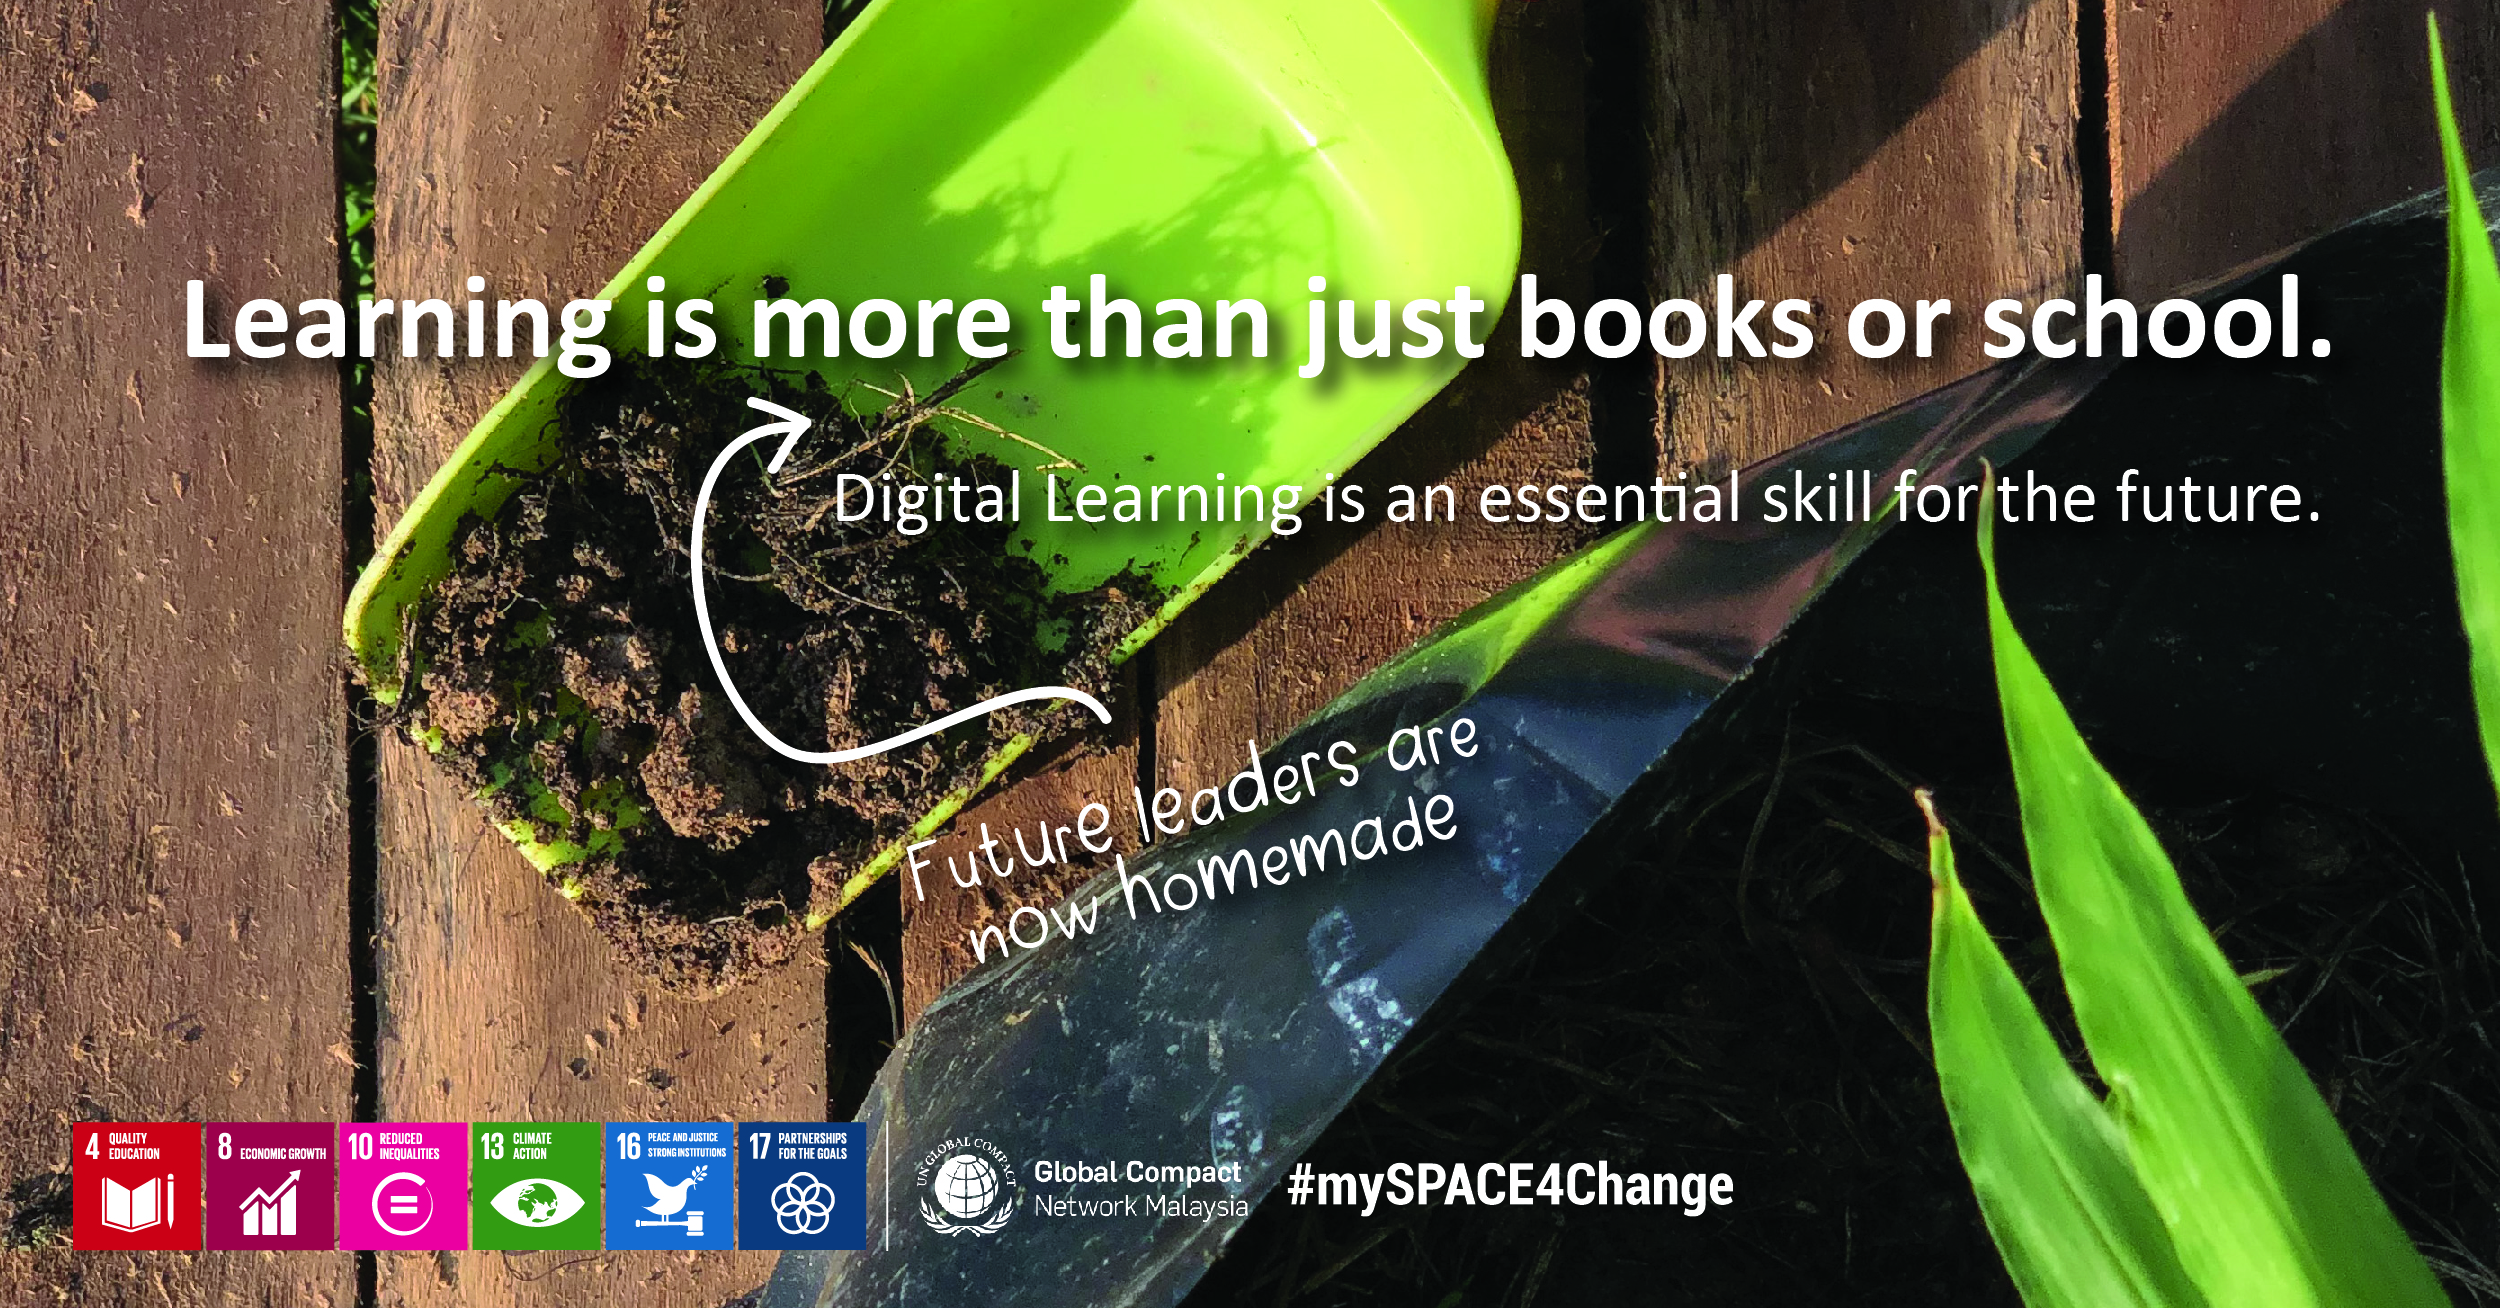 Microsoft supports GCMY's #myspace4change to raise awareness of SDGs 2030